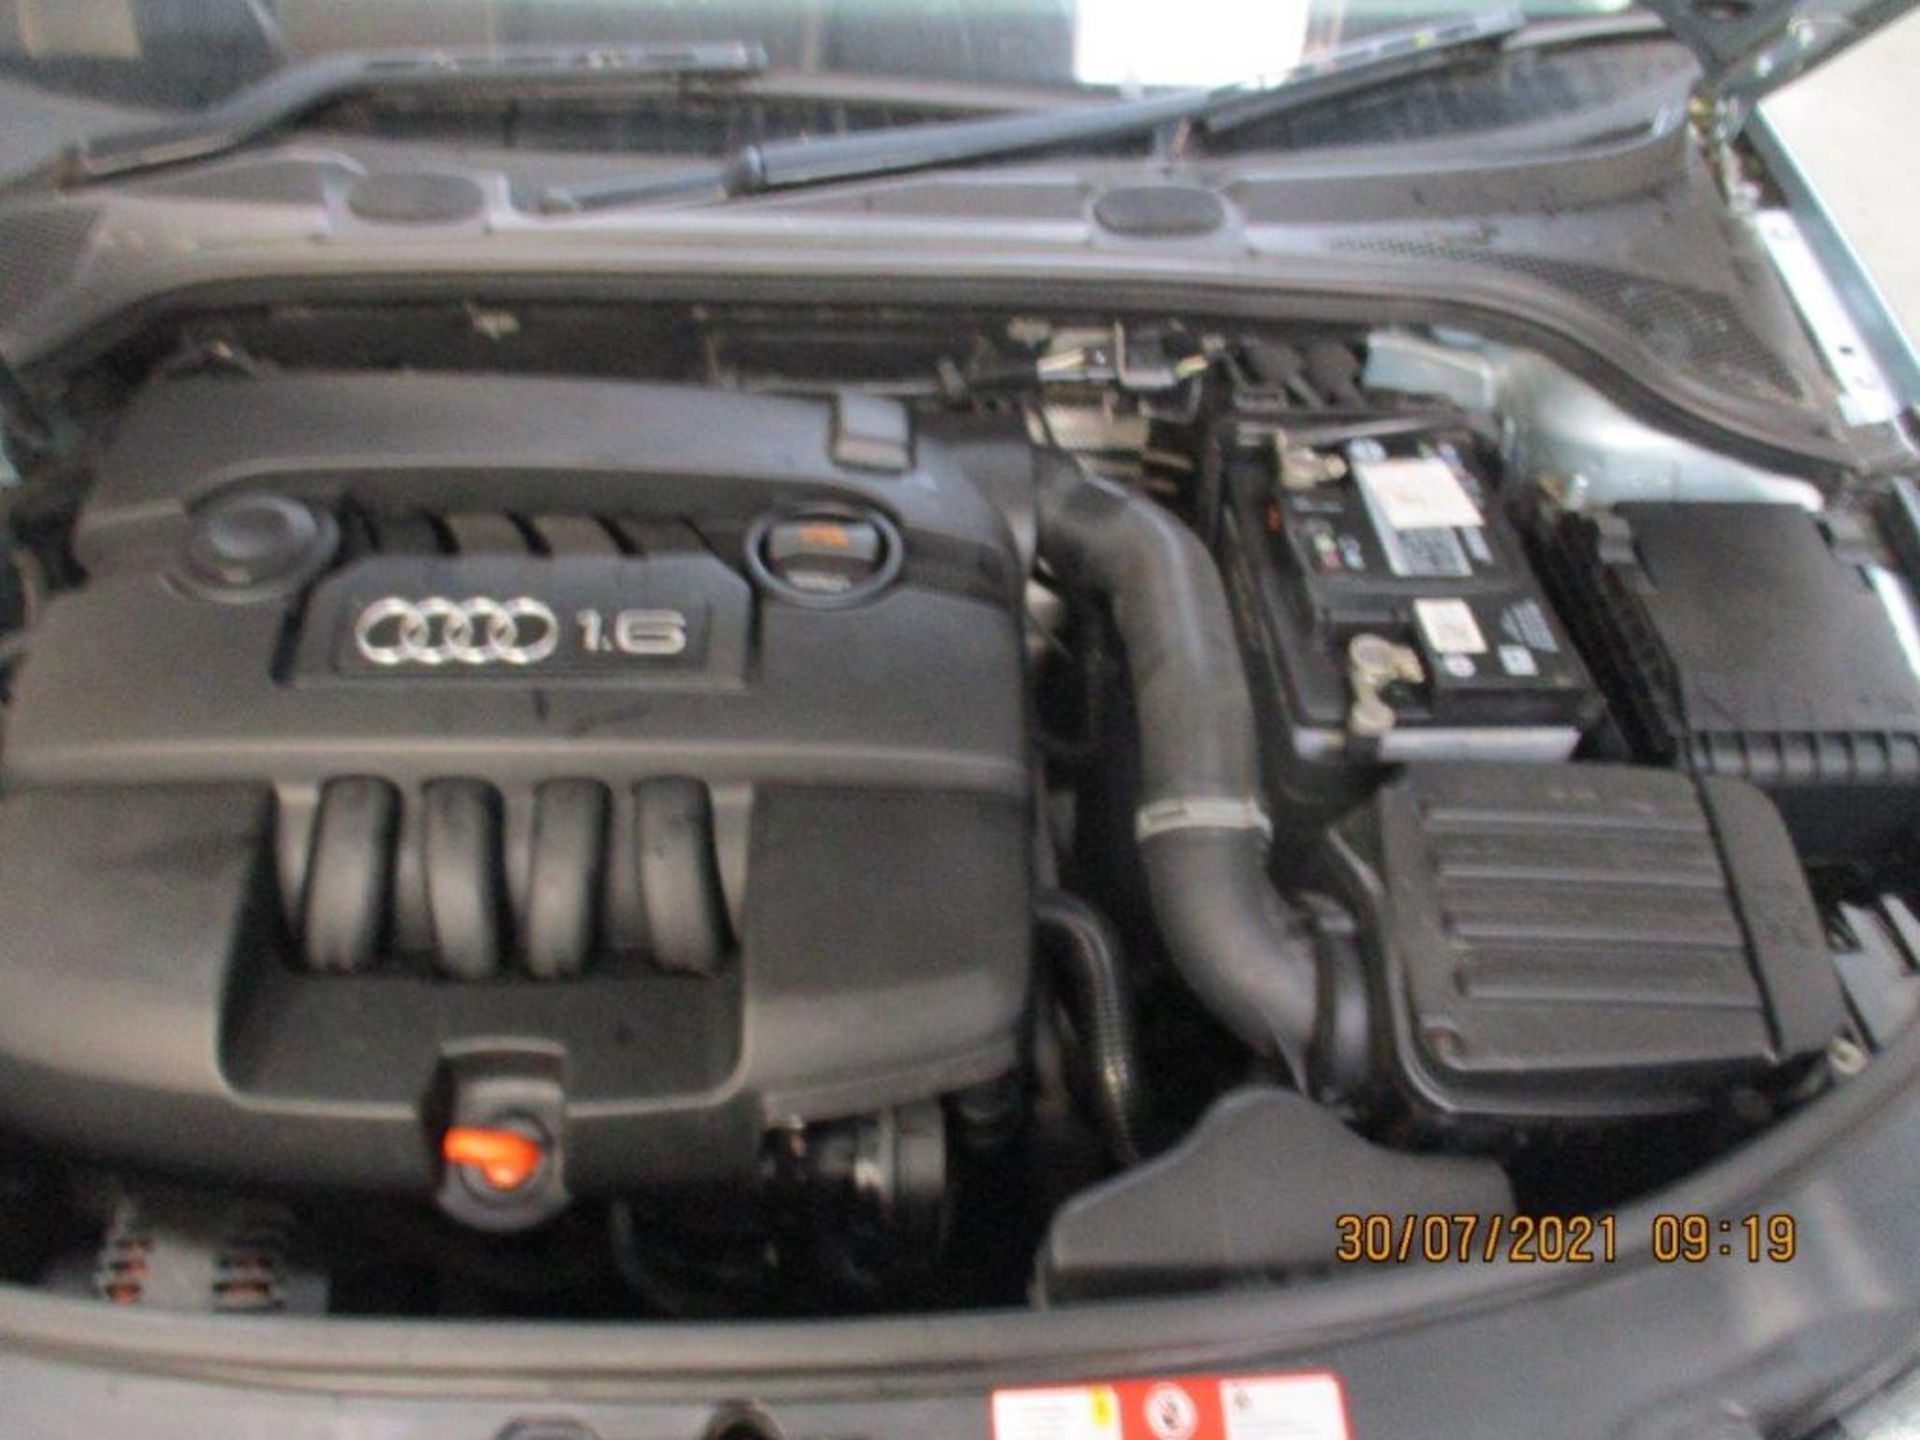 55 06 Audi A3 Special Edition - Image 7 of 15